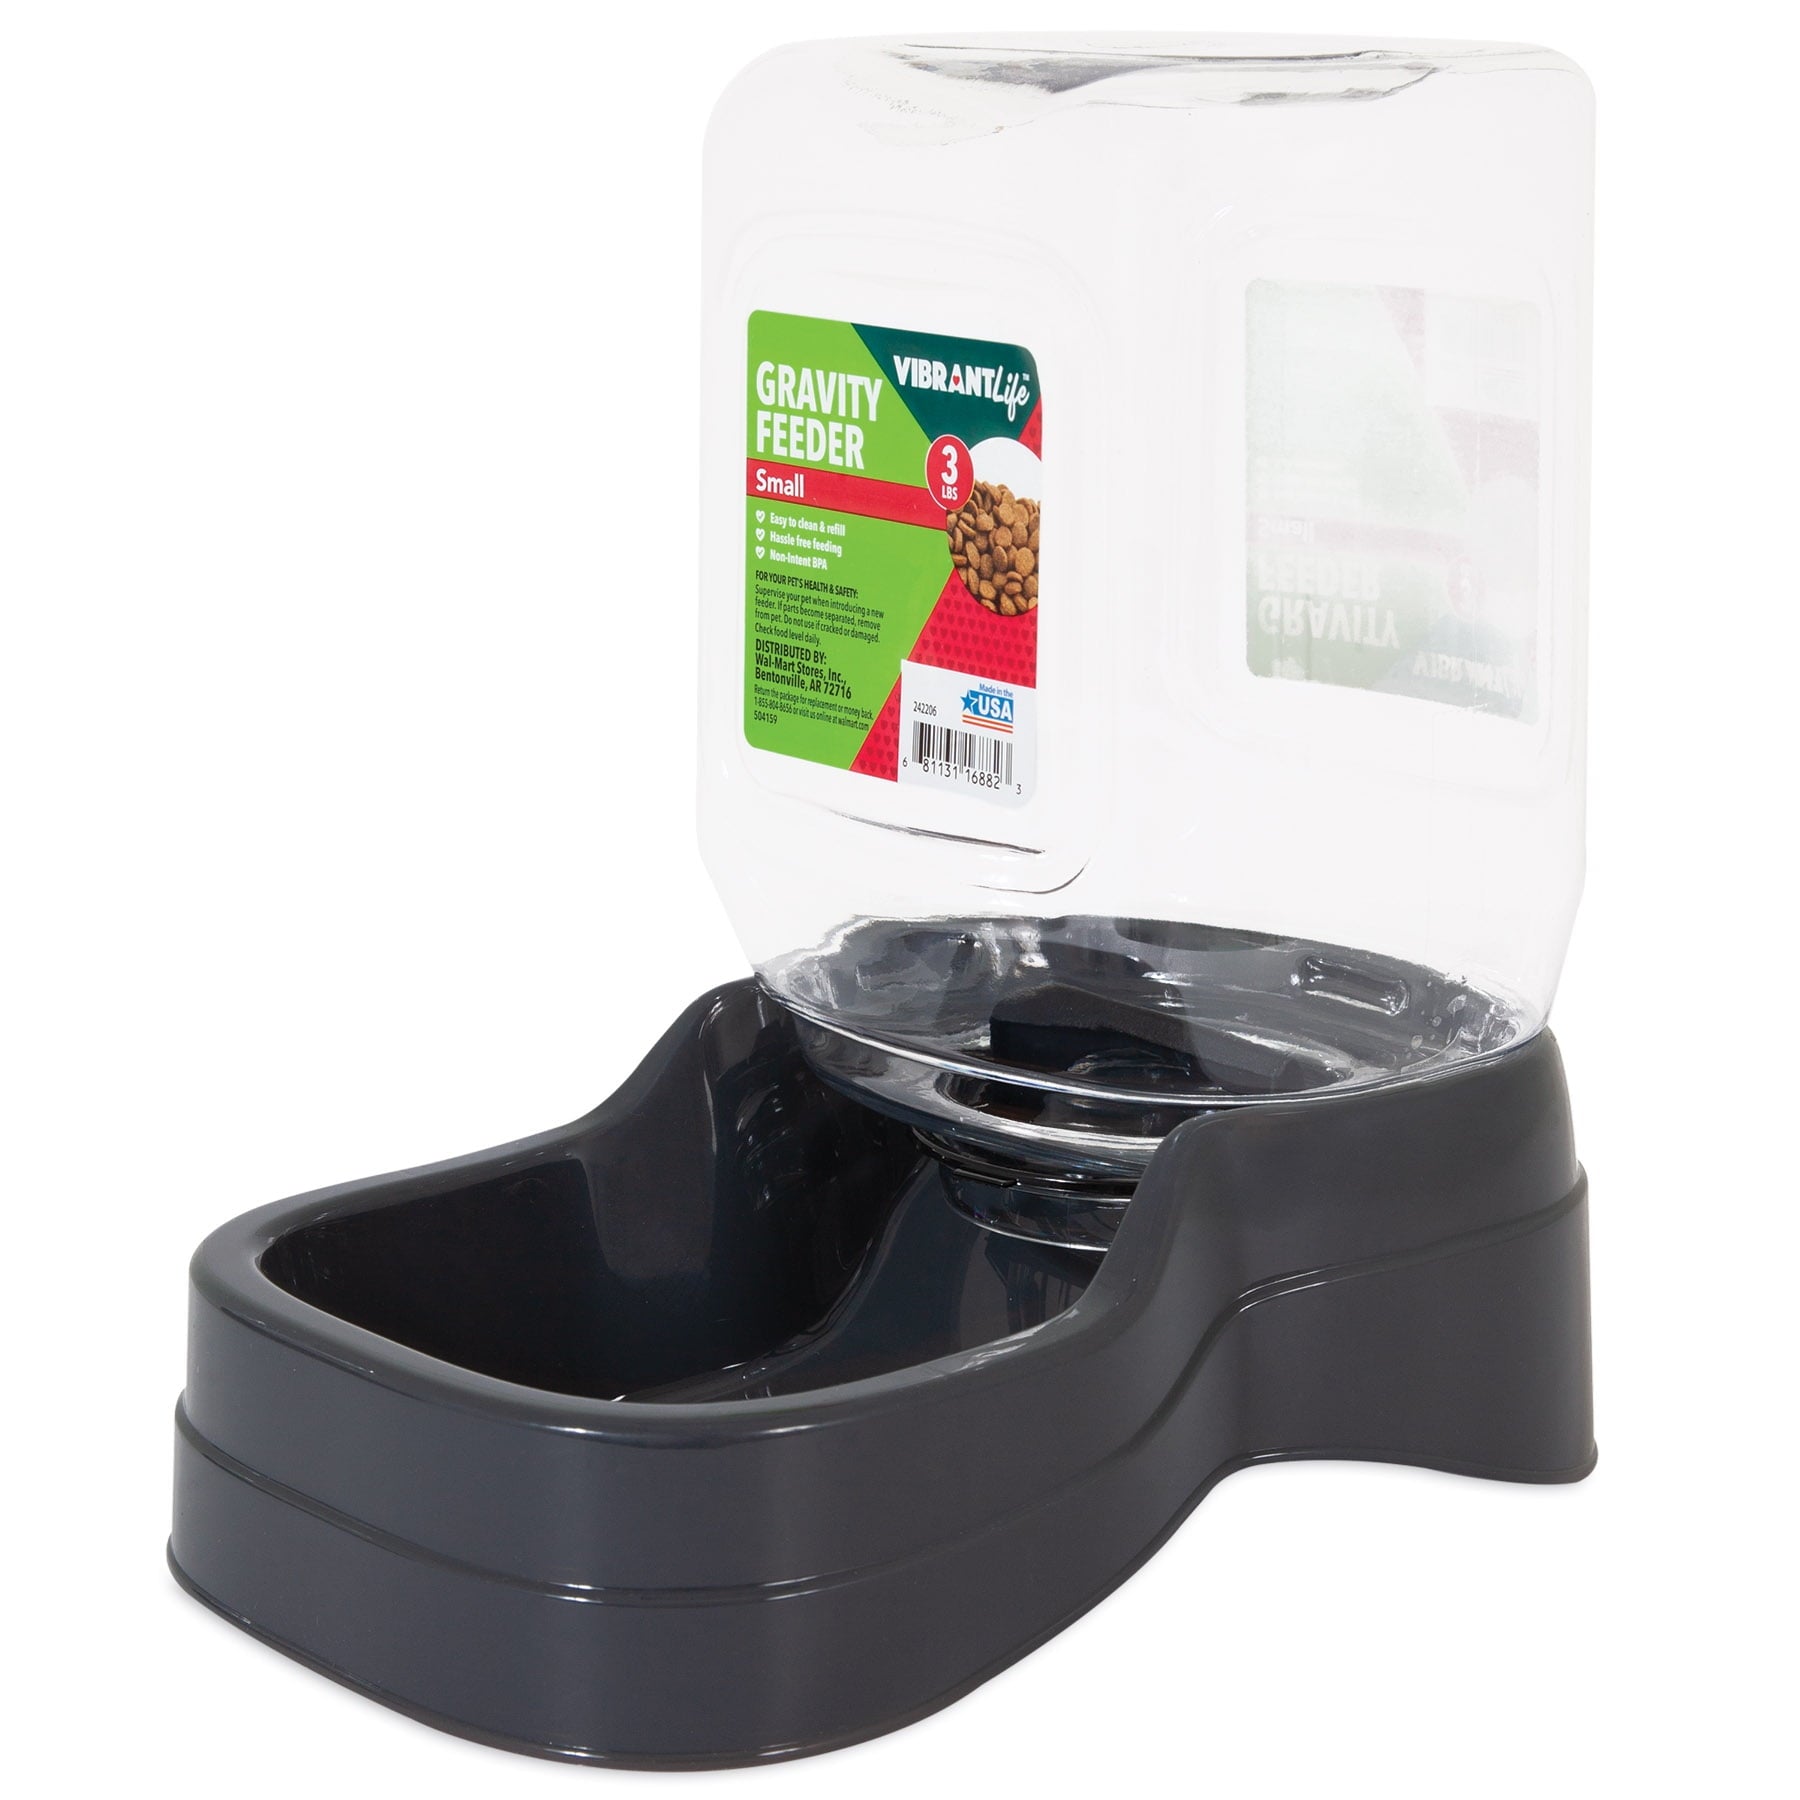 Wholesale prices with free shipping all over United States Vibrant Life Gravity Pet Feeder, Small, 3lb - Steven Deals